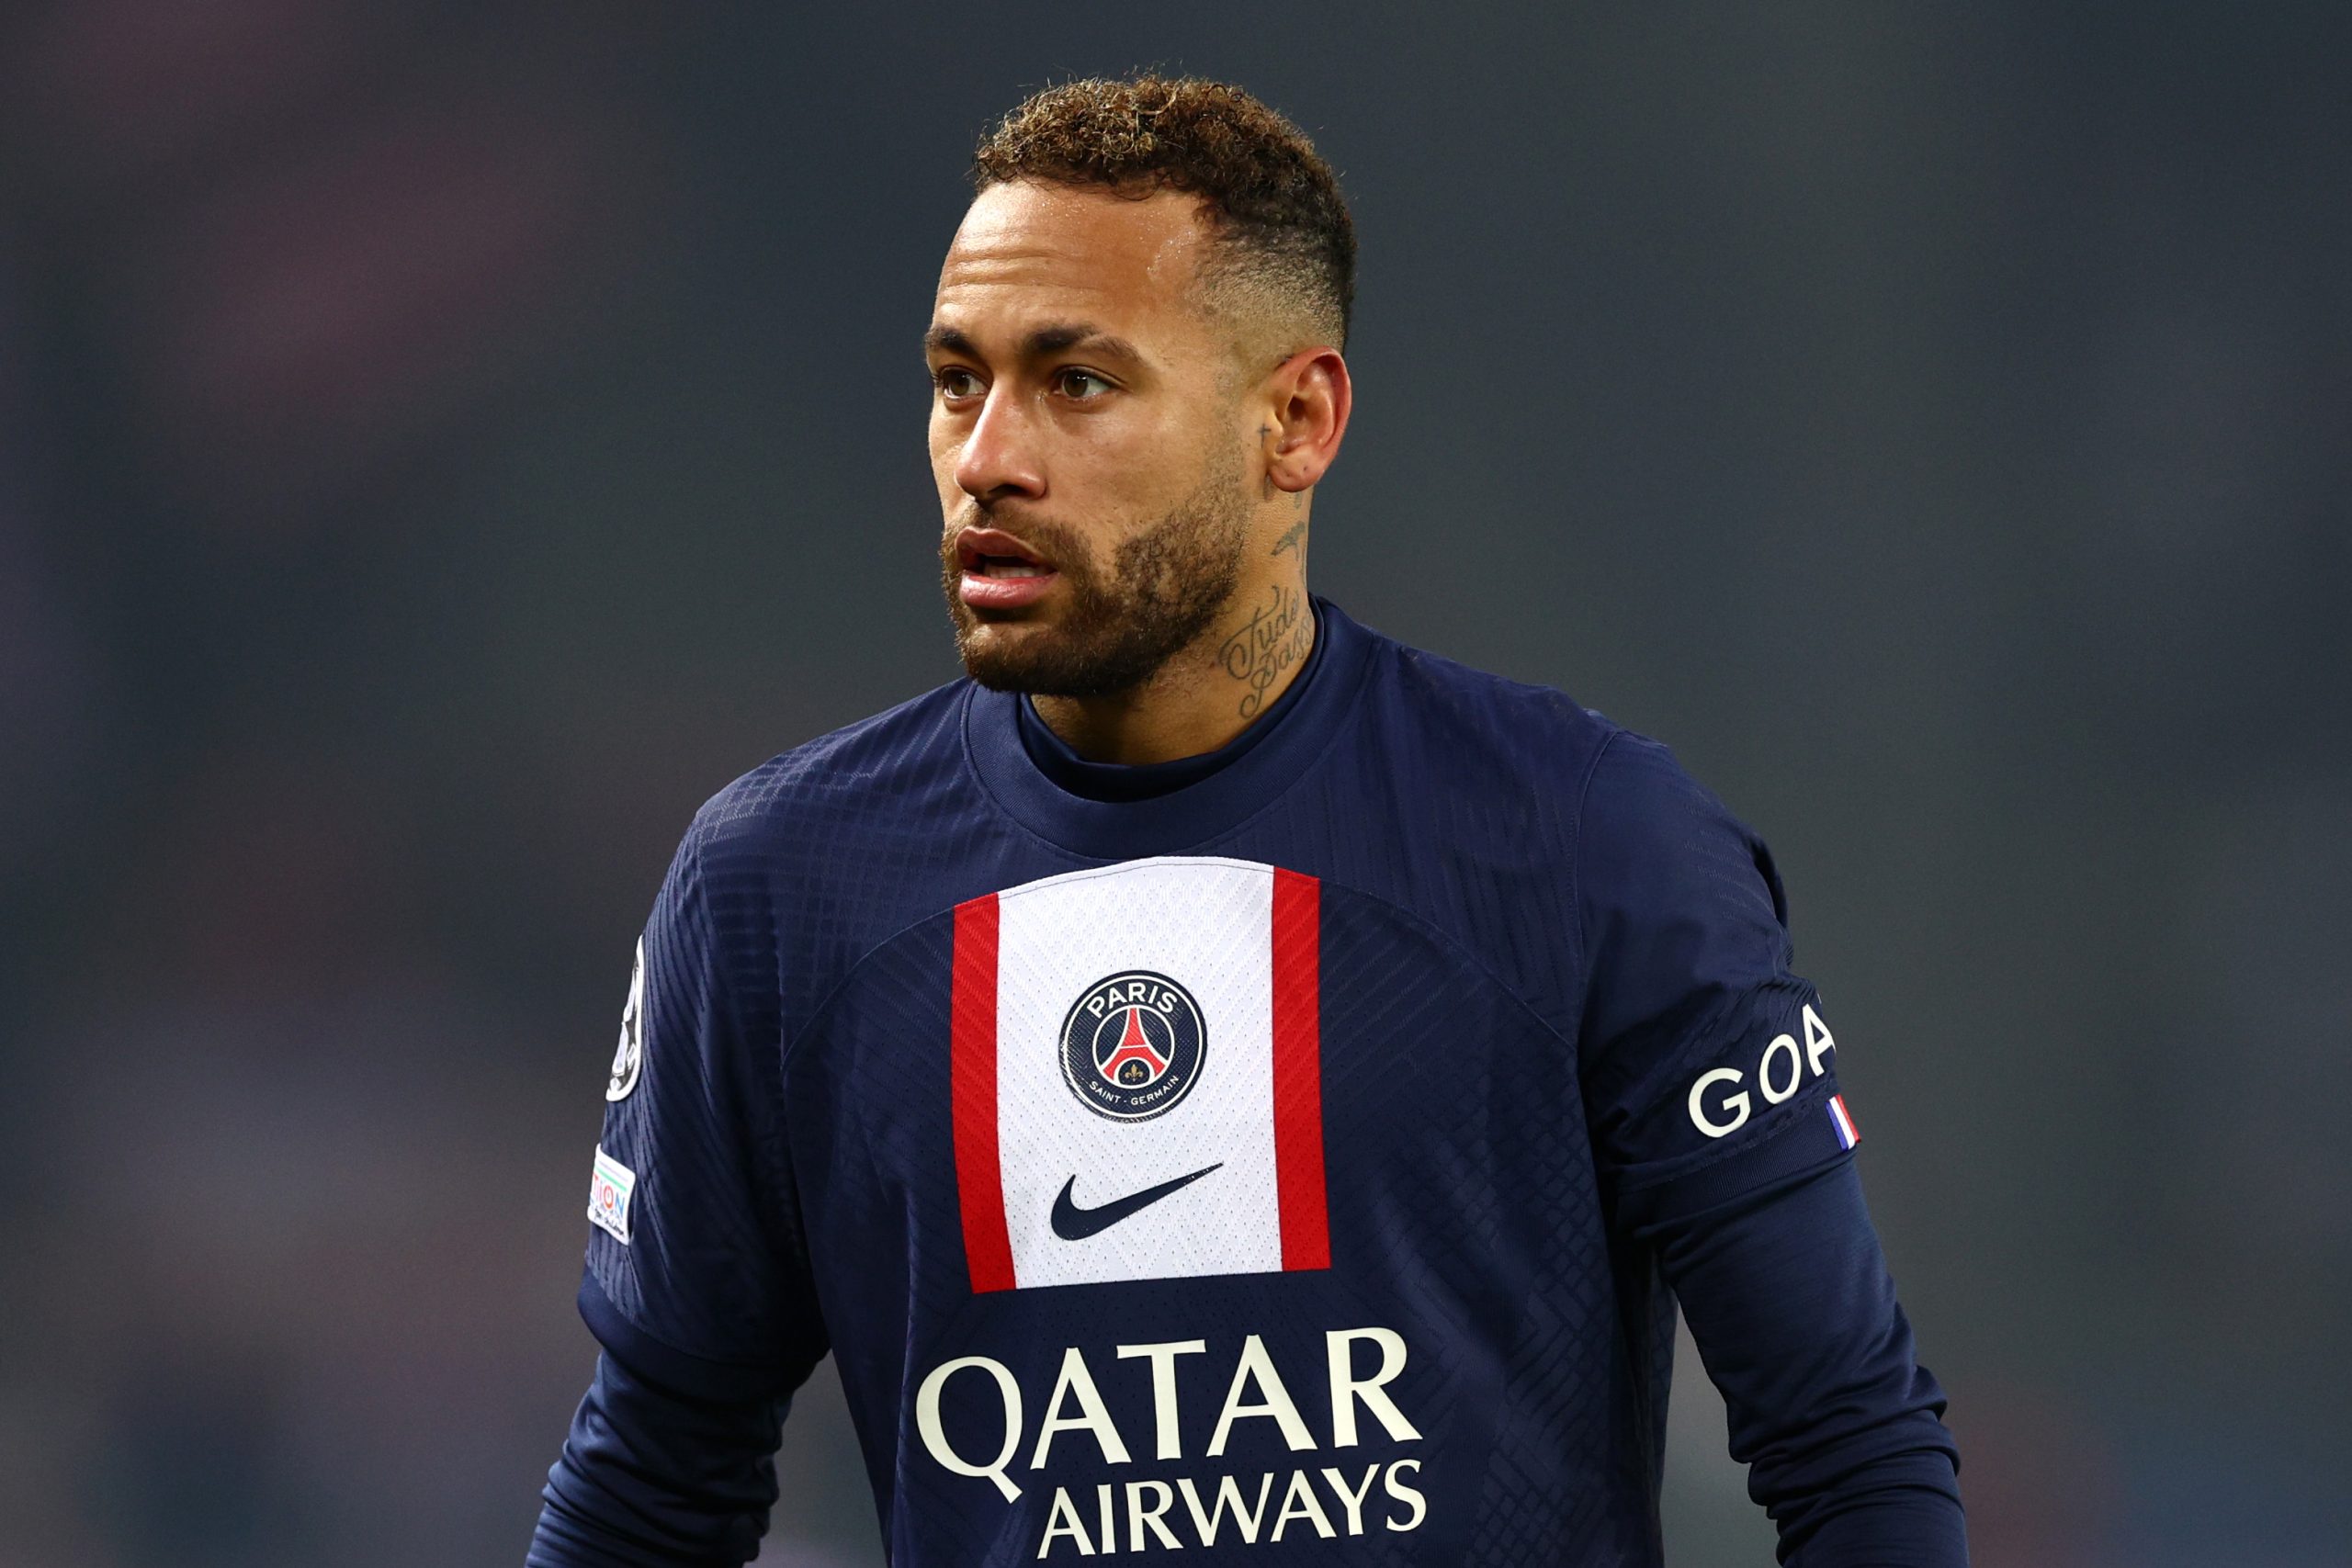 Neymar has 'no intention' of leaving PSG amidst Chelsea interest.